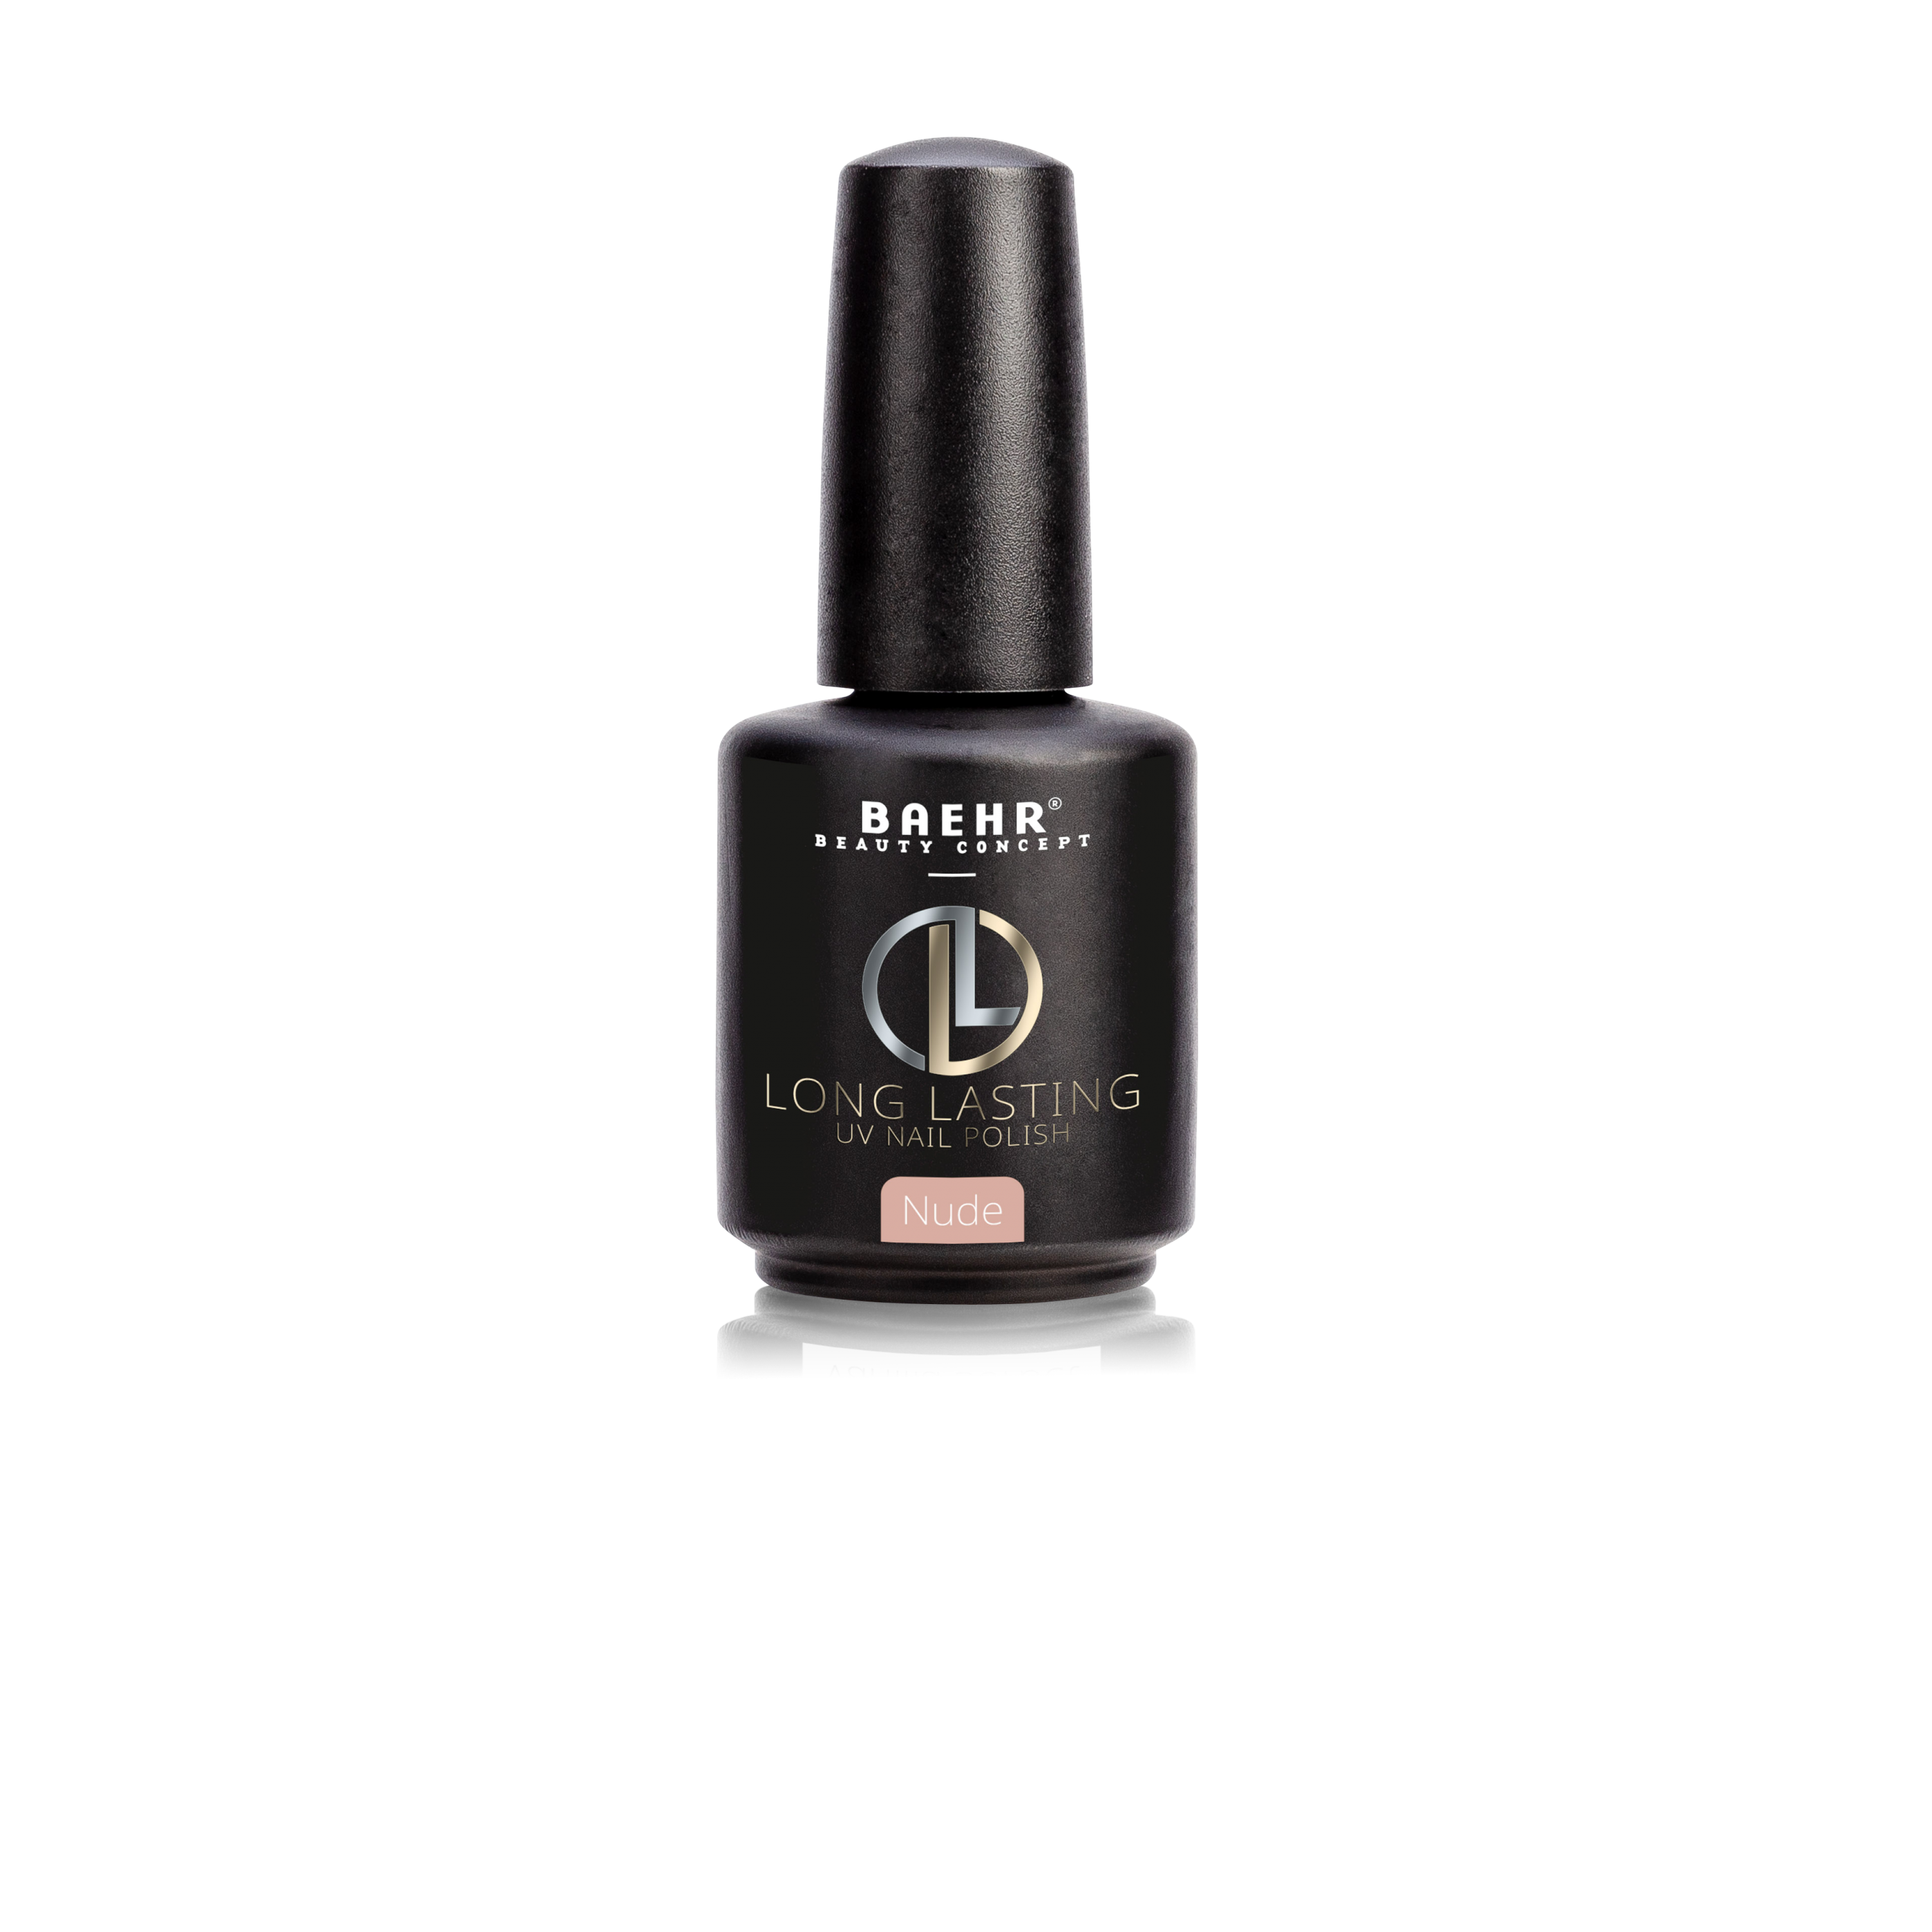 BAEHR BEAUTY CONCEPT - NAILS Long-Lasting Nude 12 ml